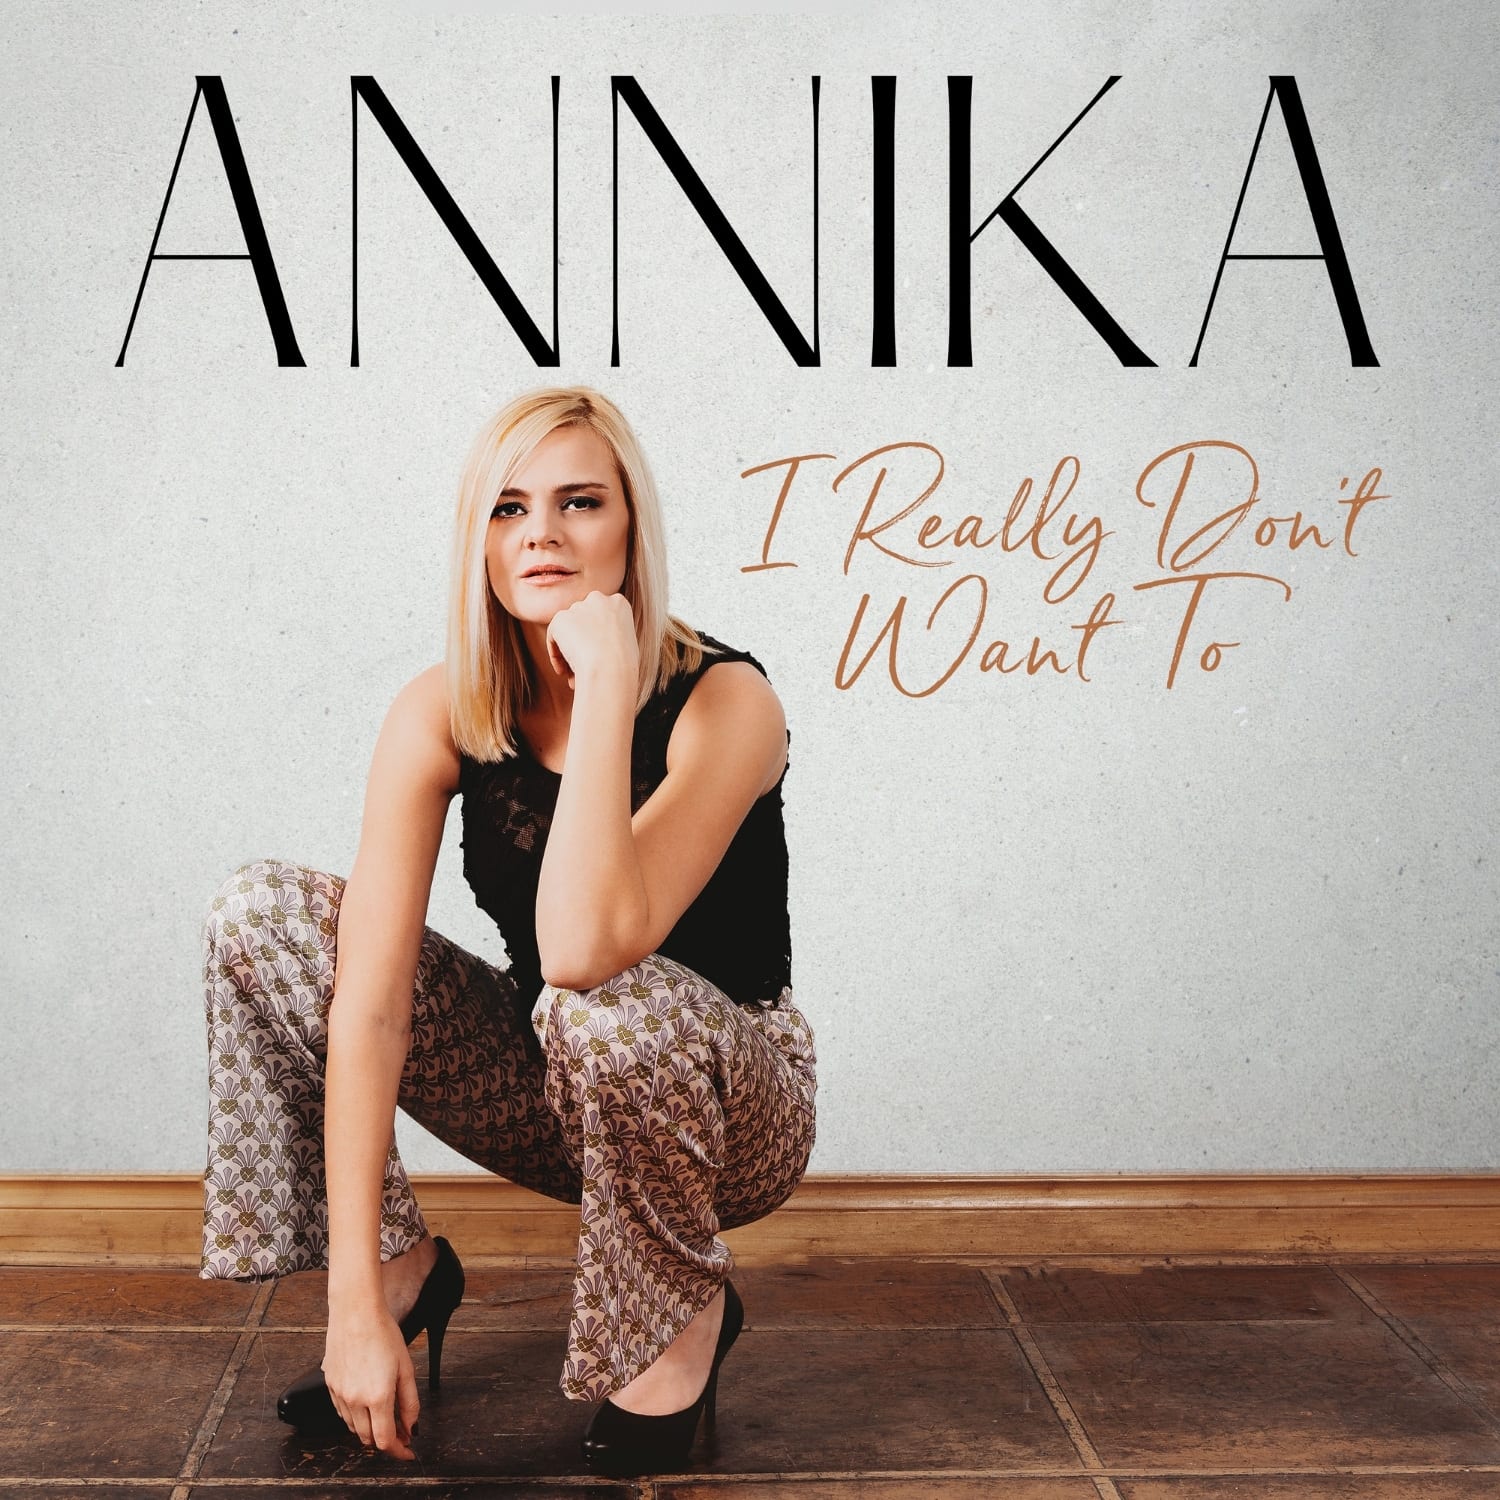 Speaking to Calgary-Based Country Artist ANNIKA About Her Newest Singles